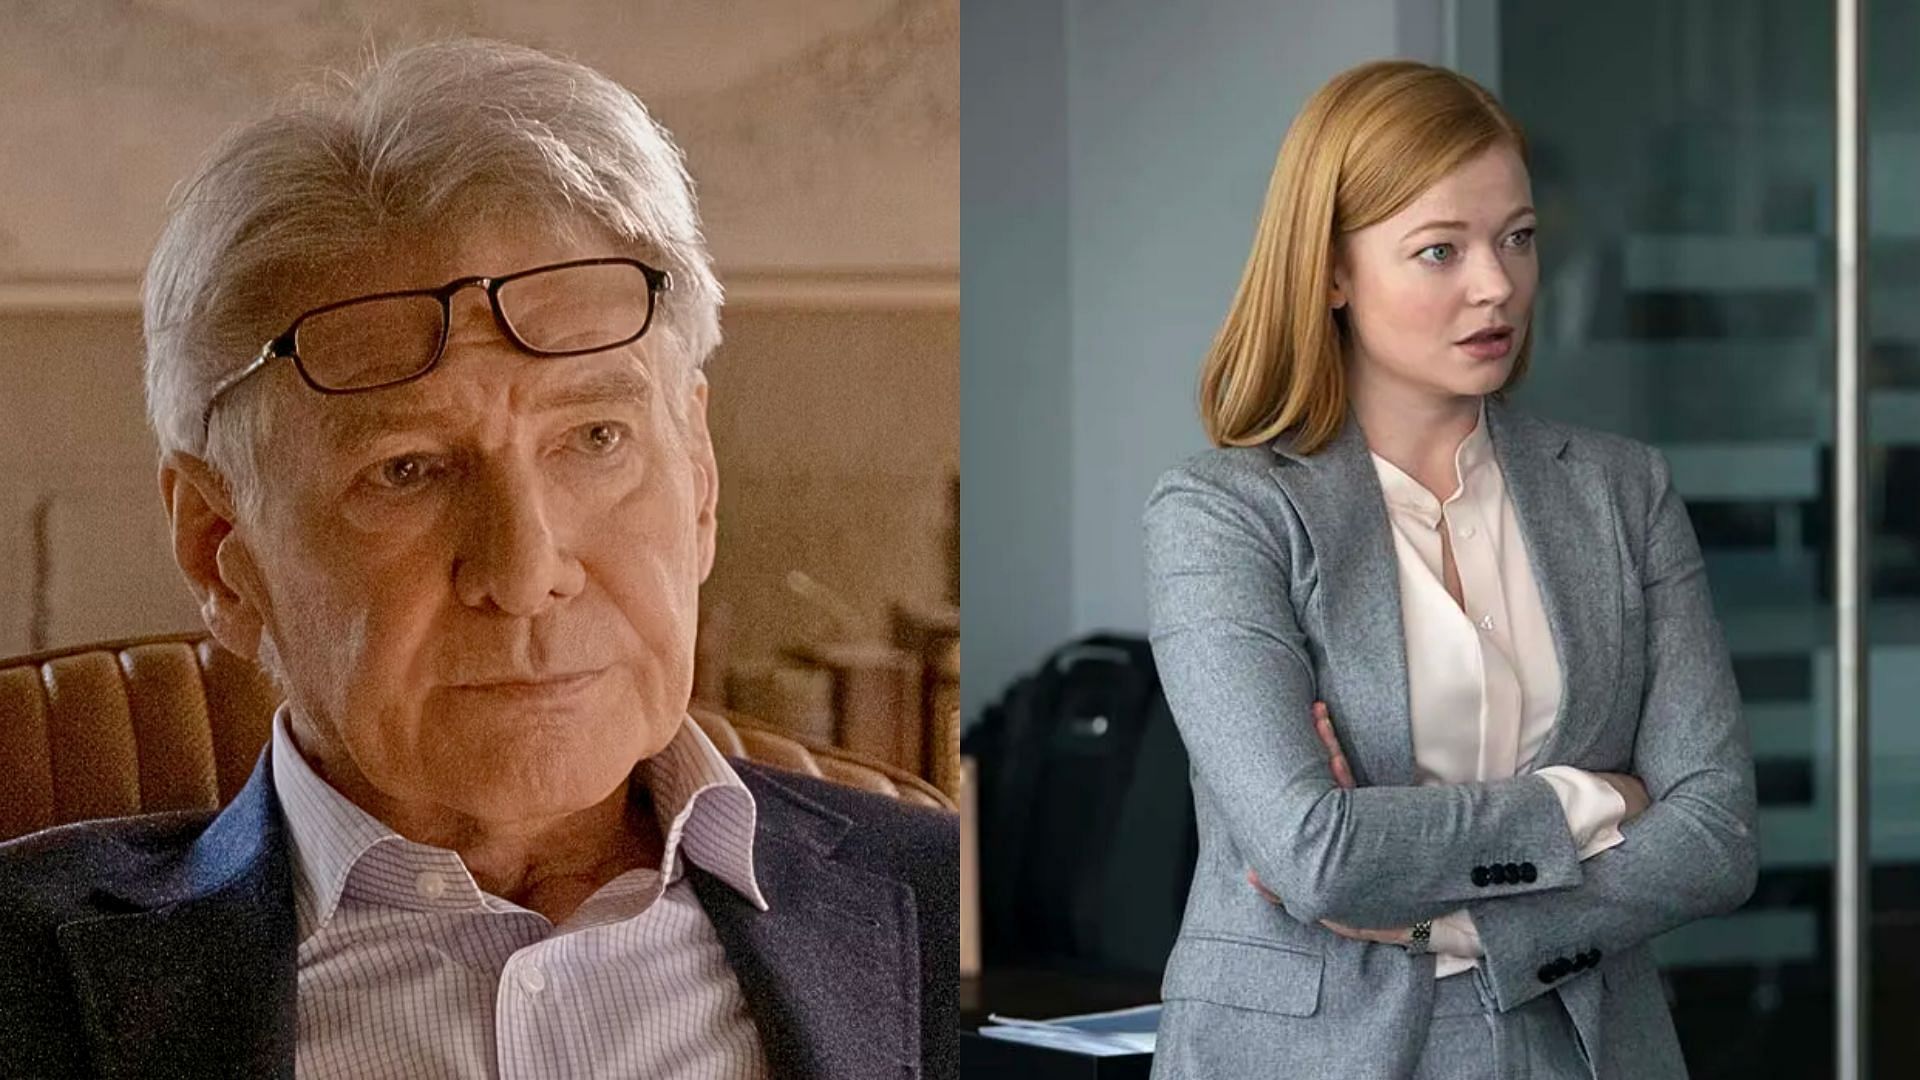 (L) Harrison Ford and (R) Sarah Snook are two of the top drama performers in 2023 (Images via Apple TV+ and HBO)